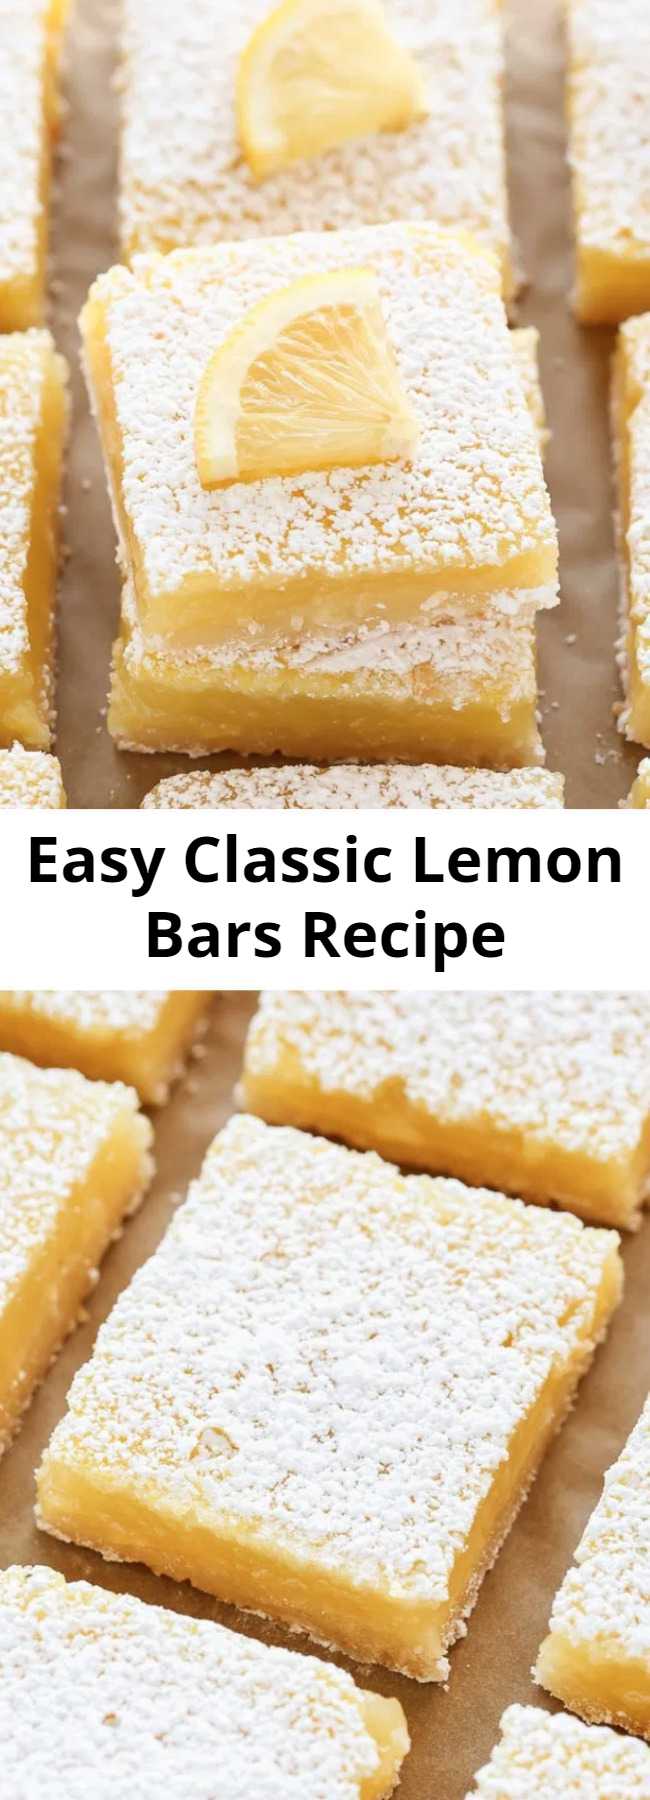 Easy Classic Lemon Bars Recipe - These Classic Lemon Bars feature an easy homemade shortbread crust and a sweet and tangy lemon filling. These bars are so easy to make and perfect for lemon lovers!